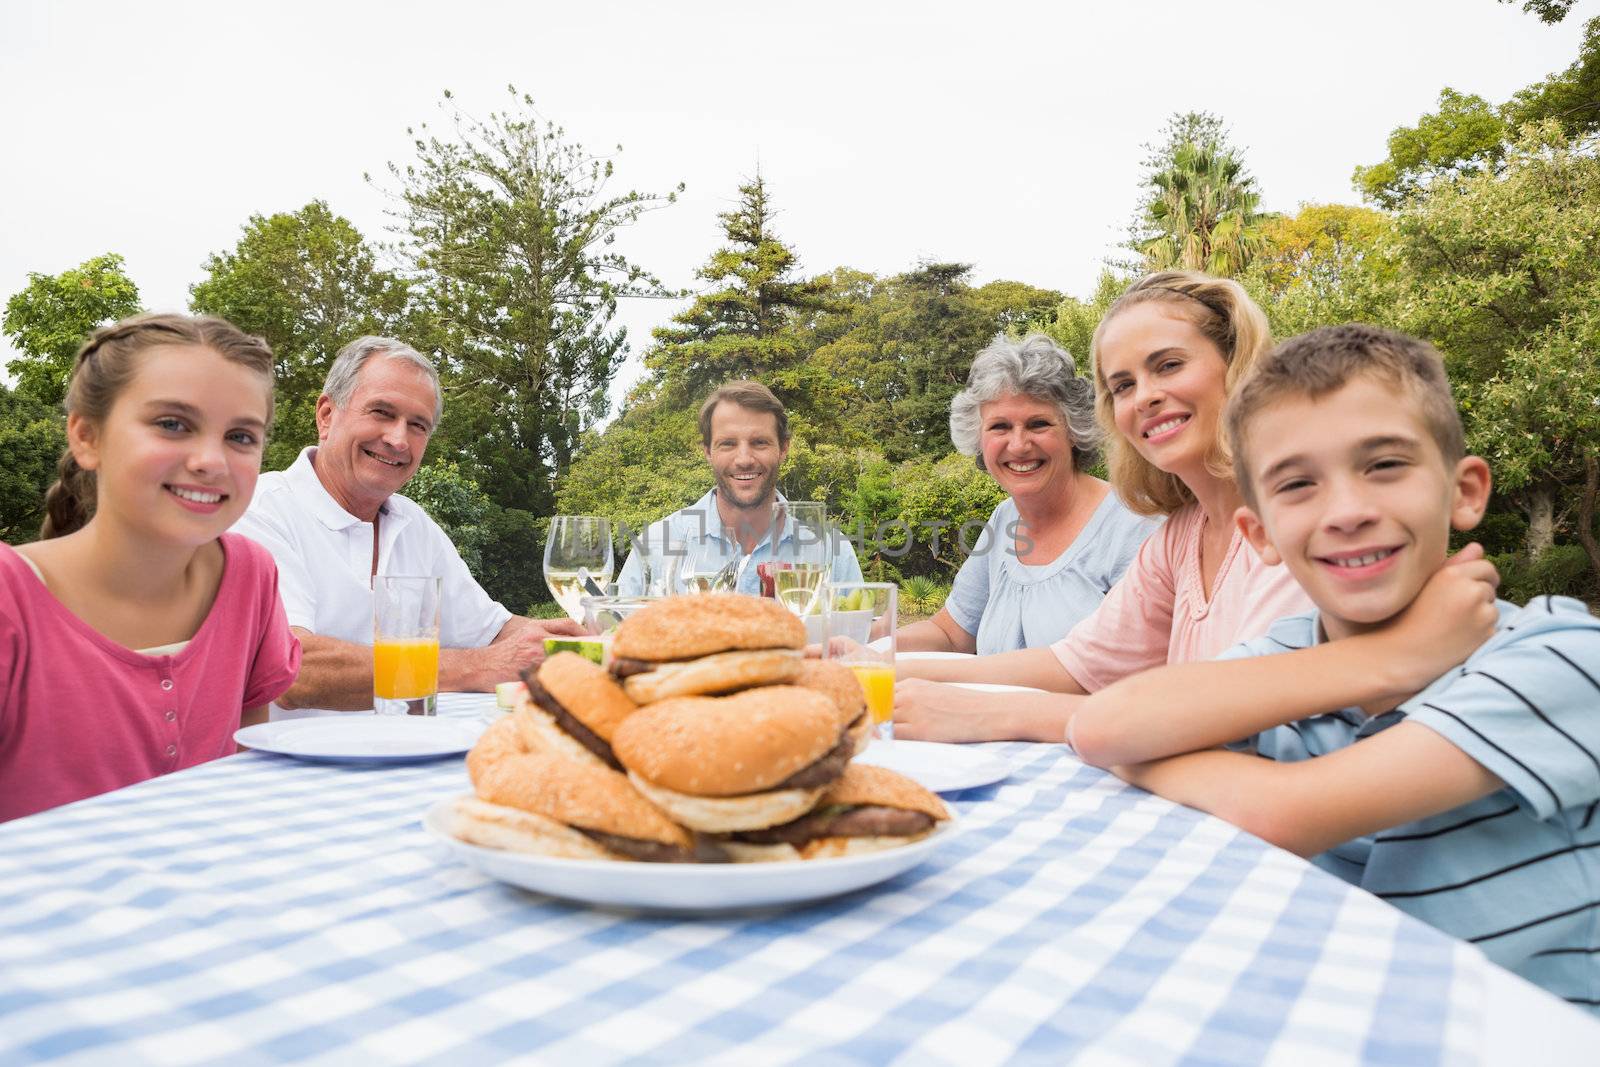 Extended family eating outdoors at picnic table smiling at camera